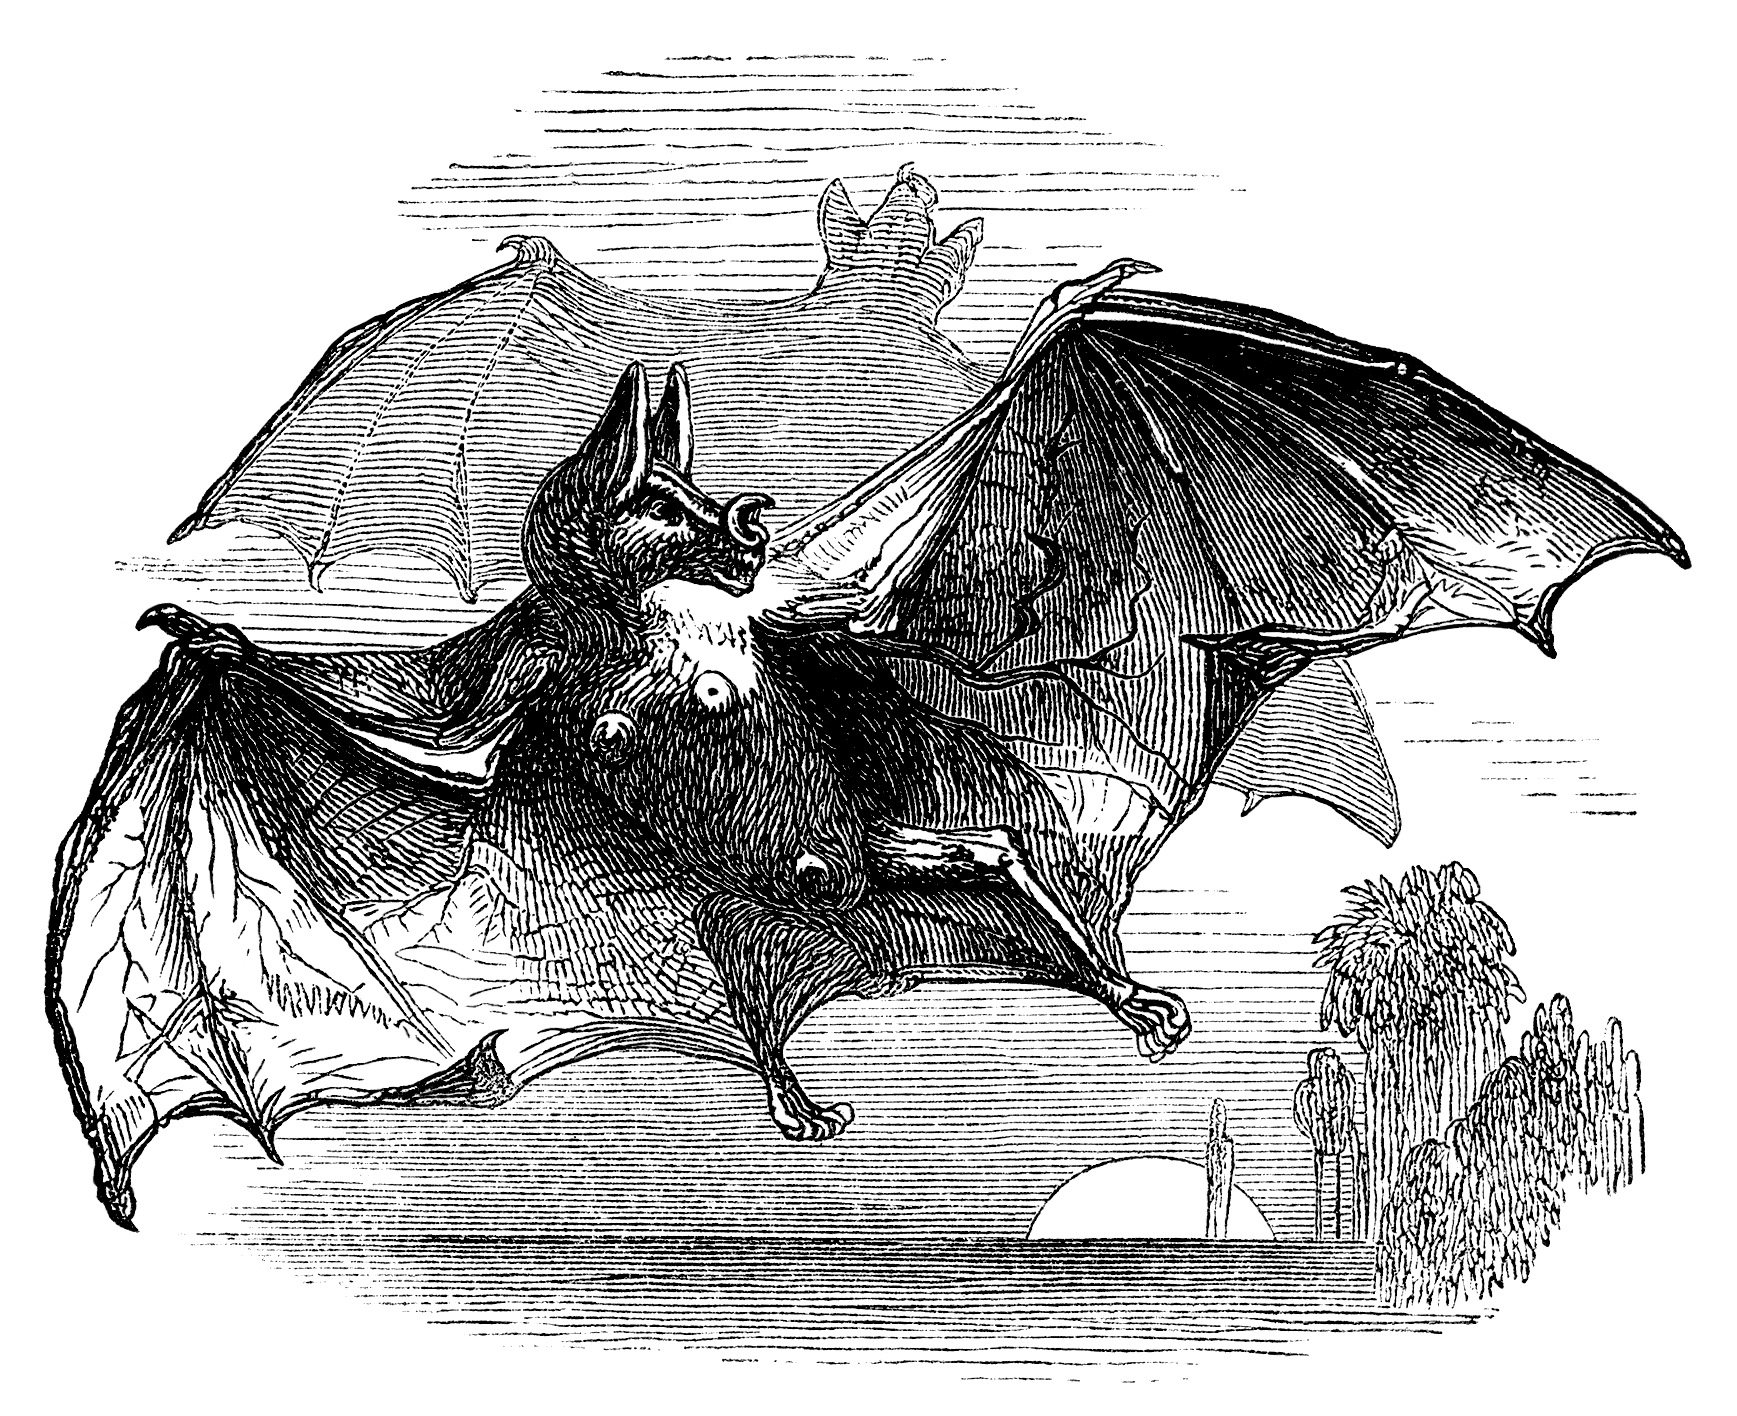 vintage halloween clip art, vampire bat clipart, black and white graphics, old book clipping, flying bat illustration